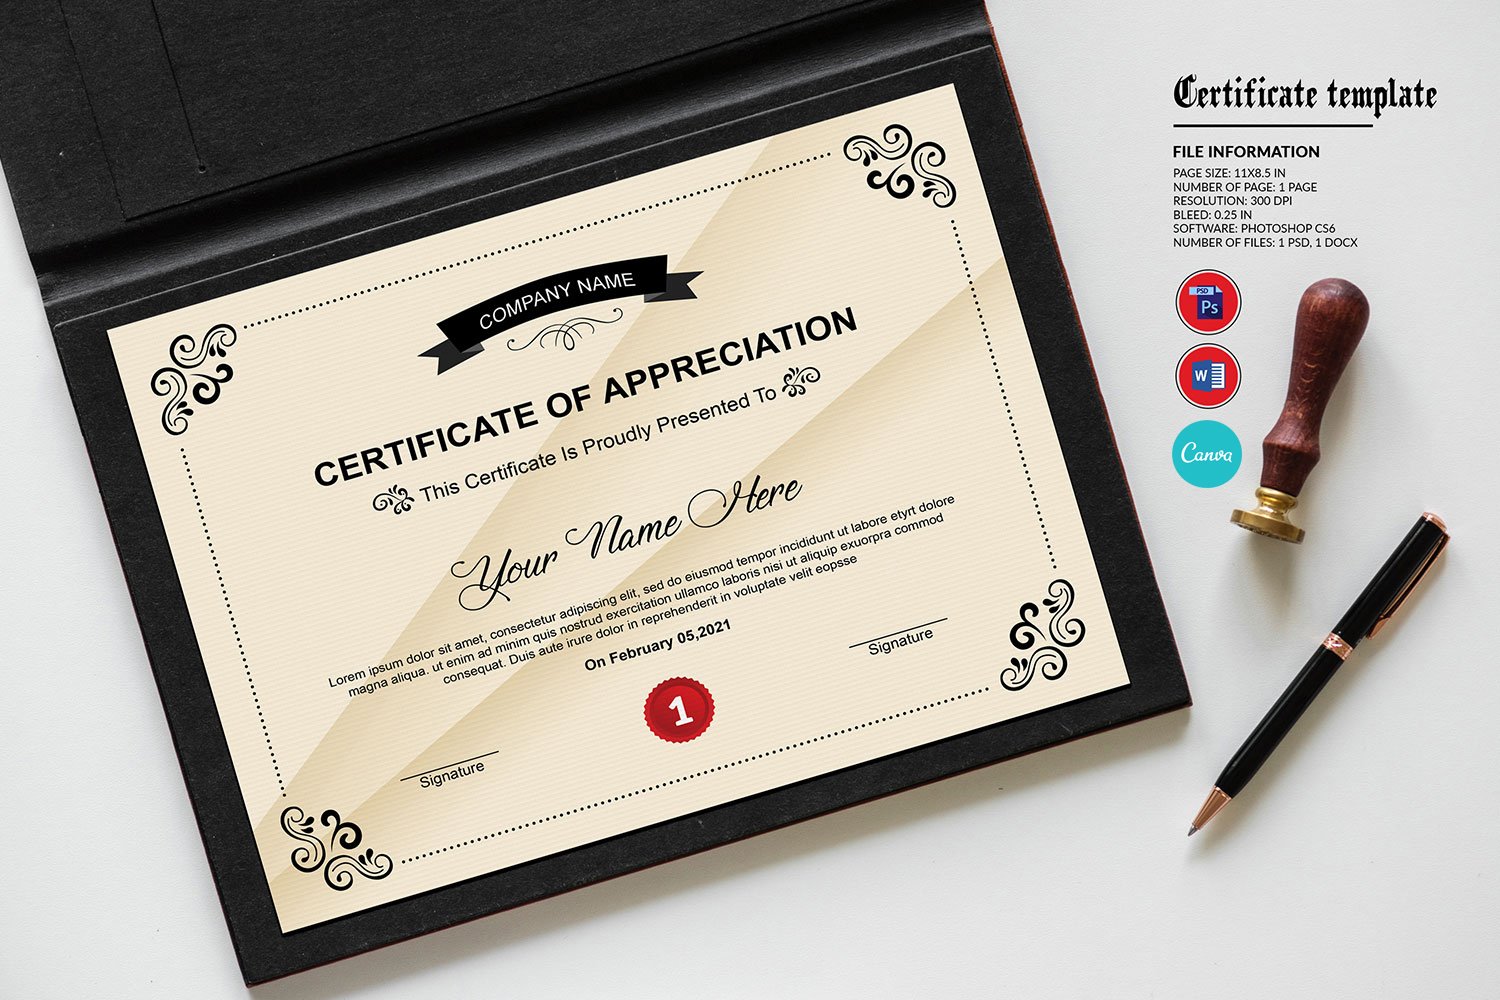 Printable Certificate Canva cover image.